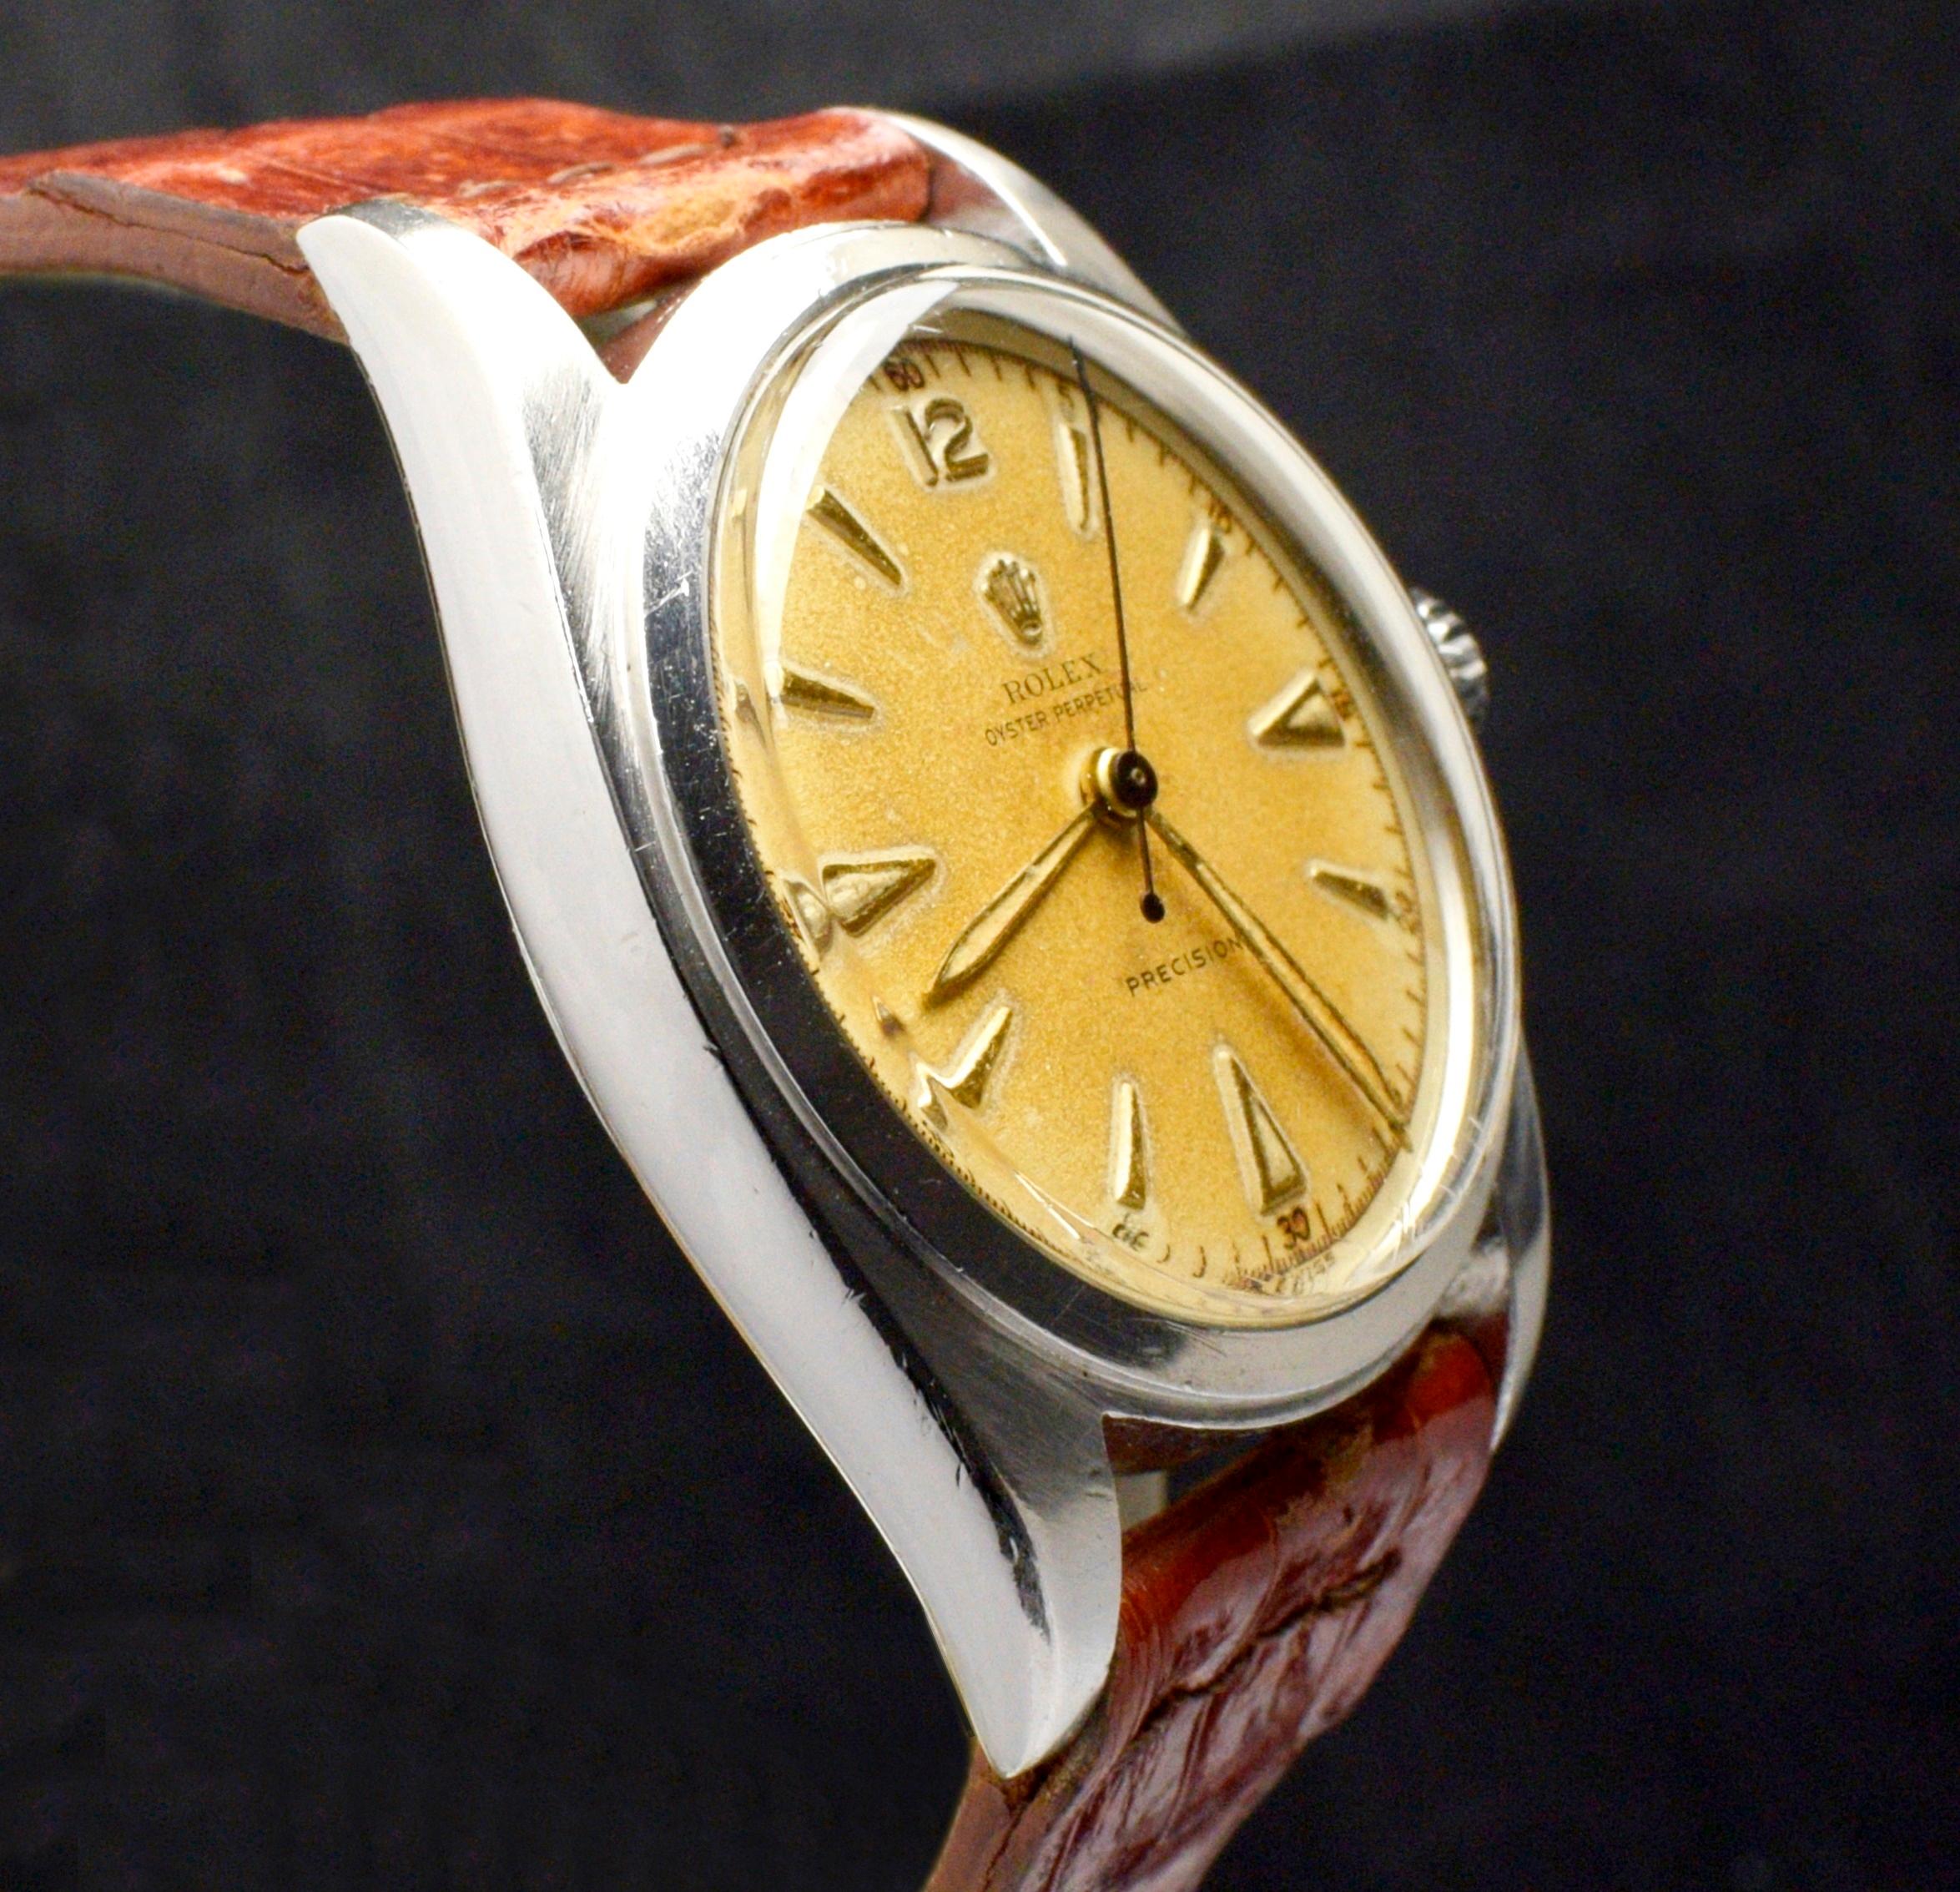 1952 rolex oyster perpetual